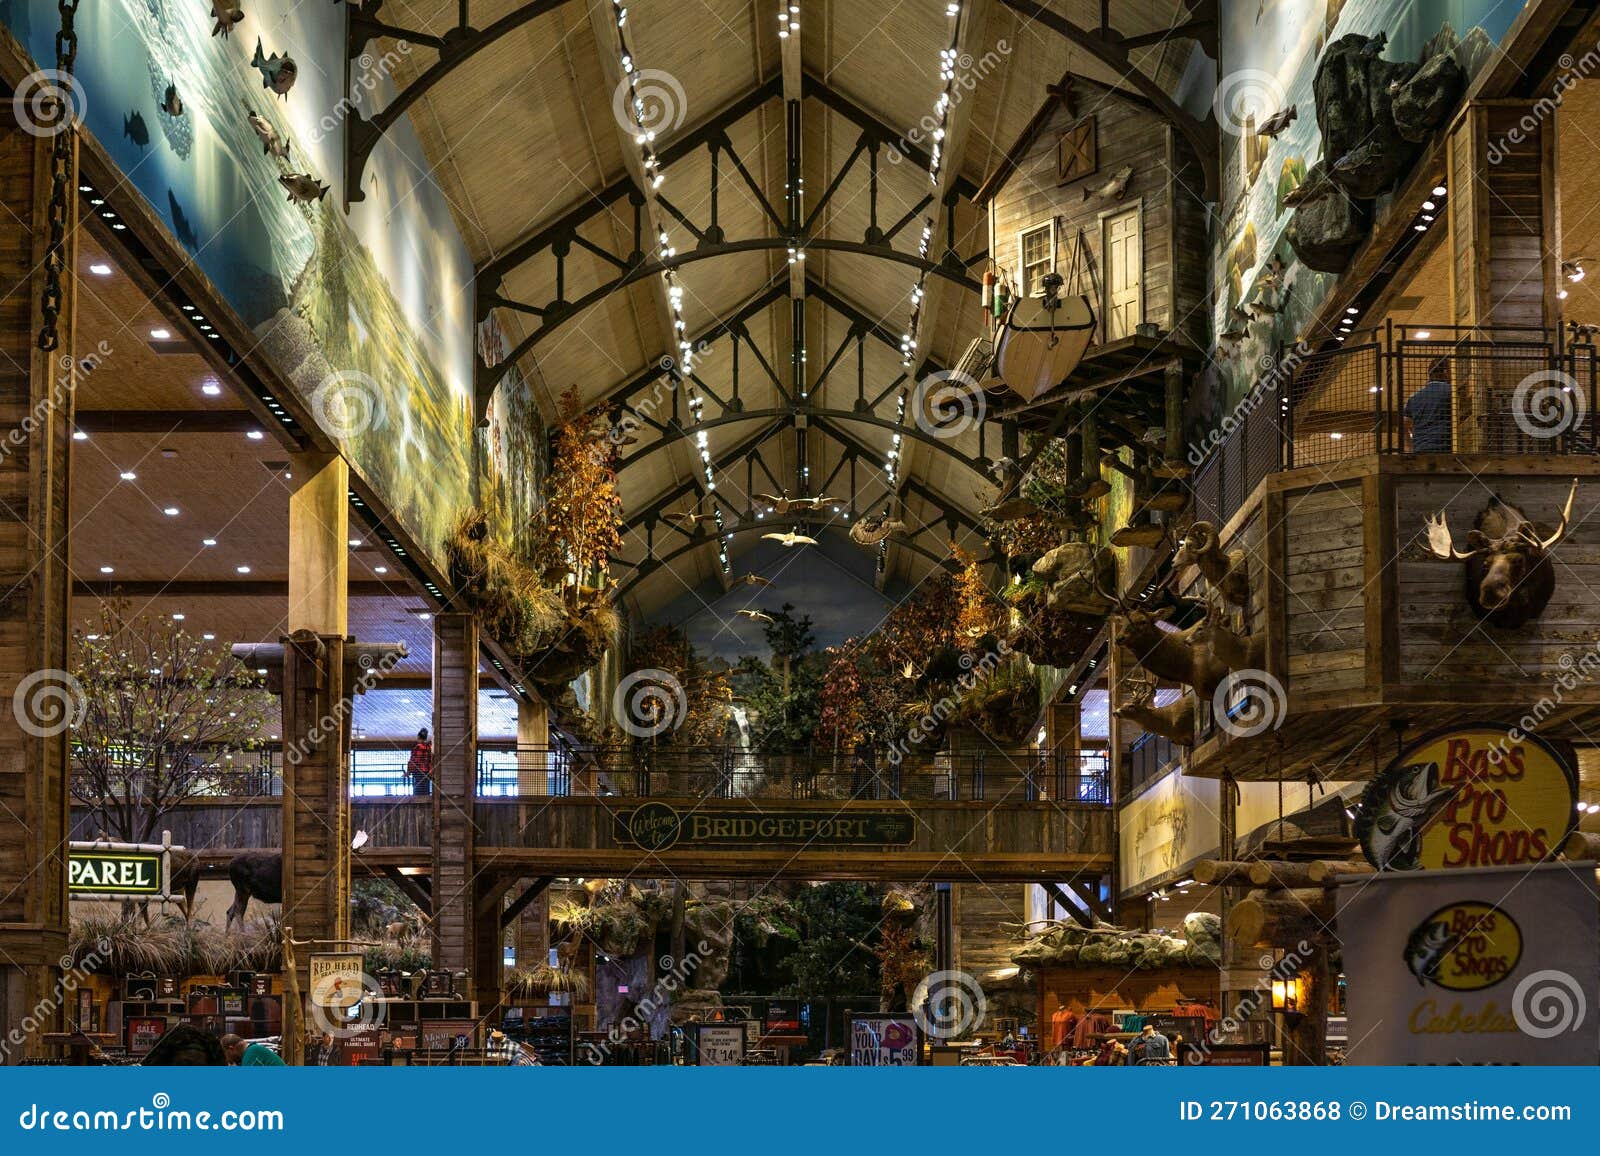 Interior of Bass Pro Shops, a Chain Known for Outdoor, Hunting and